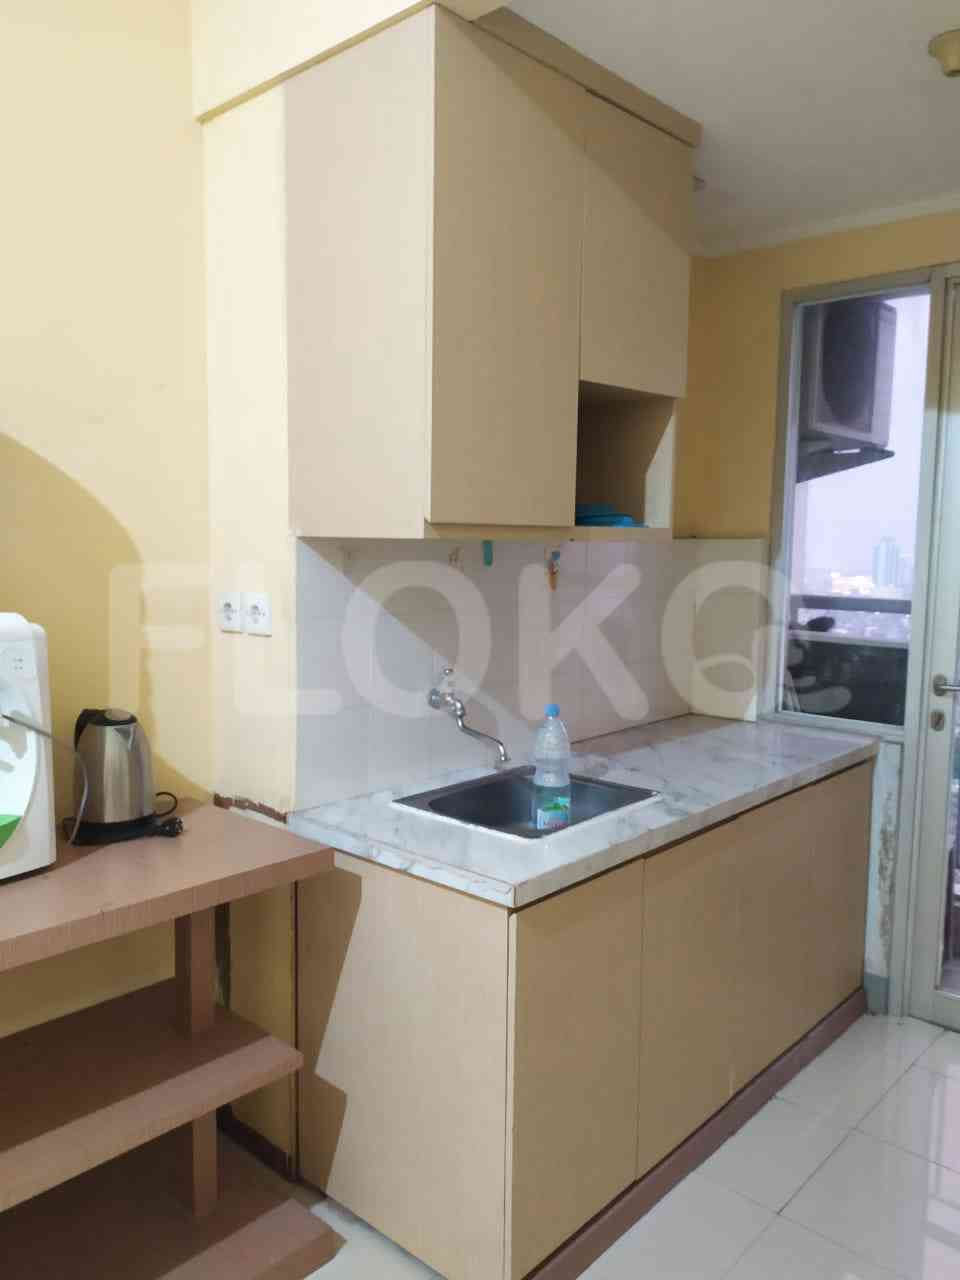 2 Bedroom on 29th Floor for Rent in Seasons City Apartment - fgr049 2